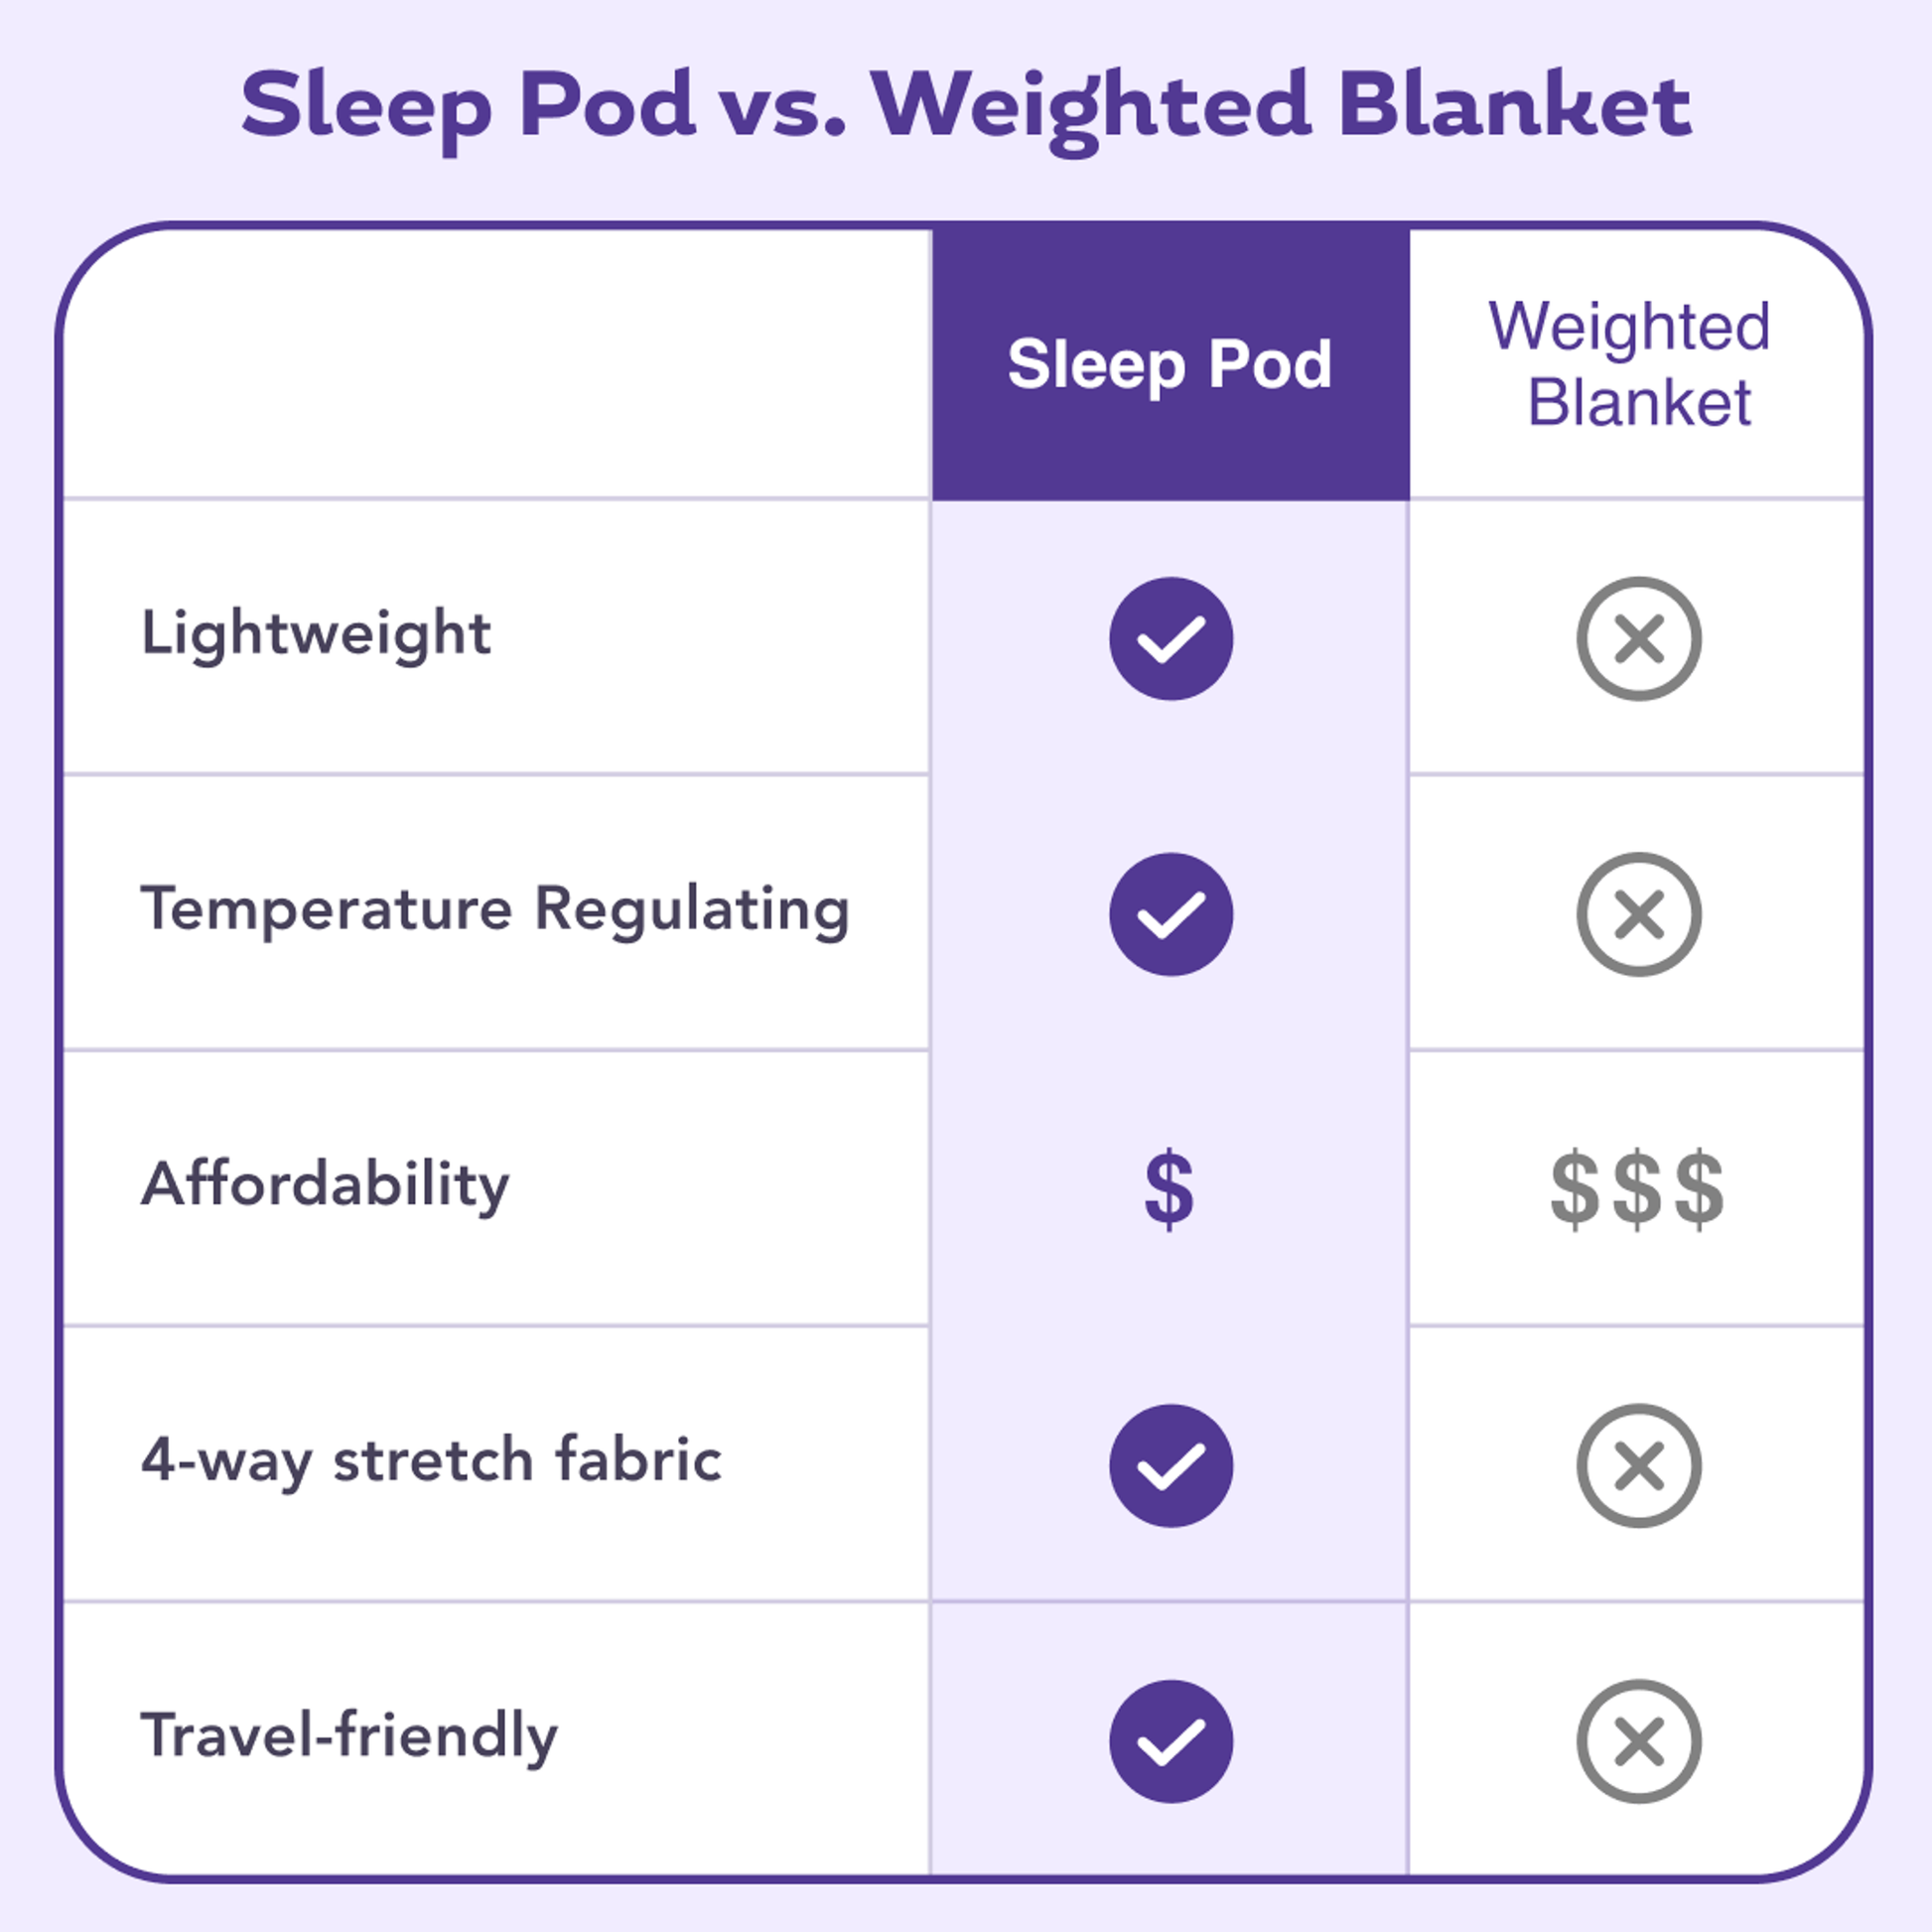 comparison of sleep pod vs weighted blanket - sleep pod wins with lightweight, temperature regulating, affordability, fabric and travel friendly